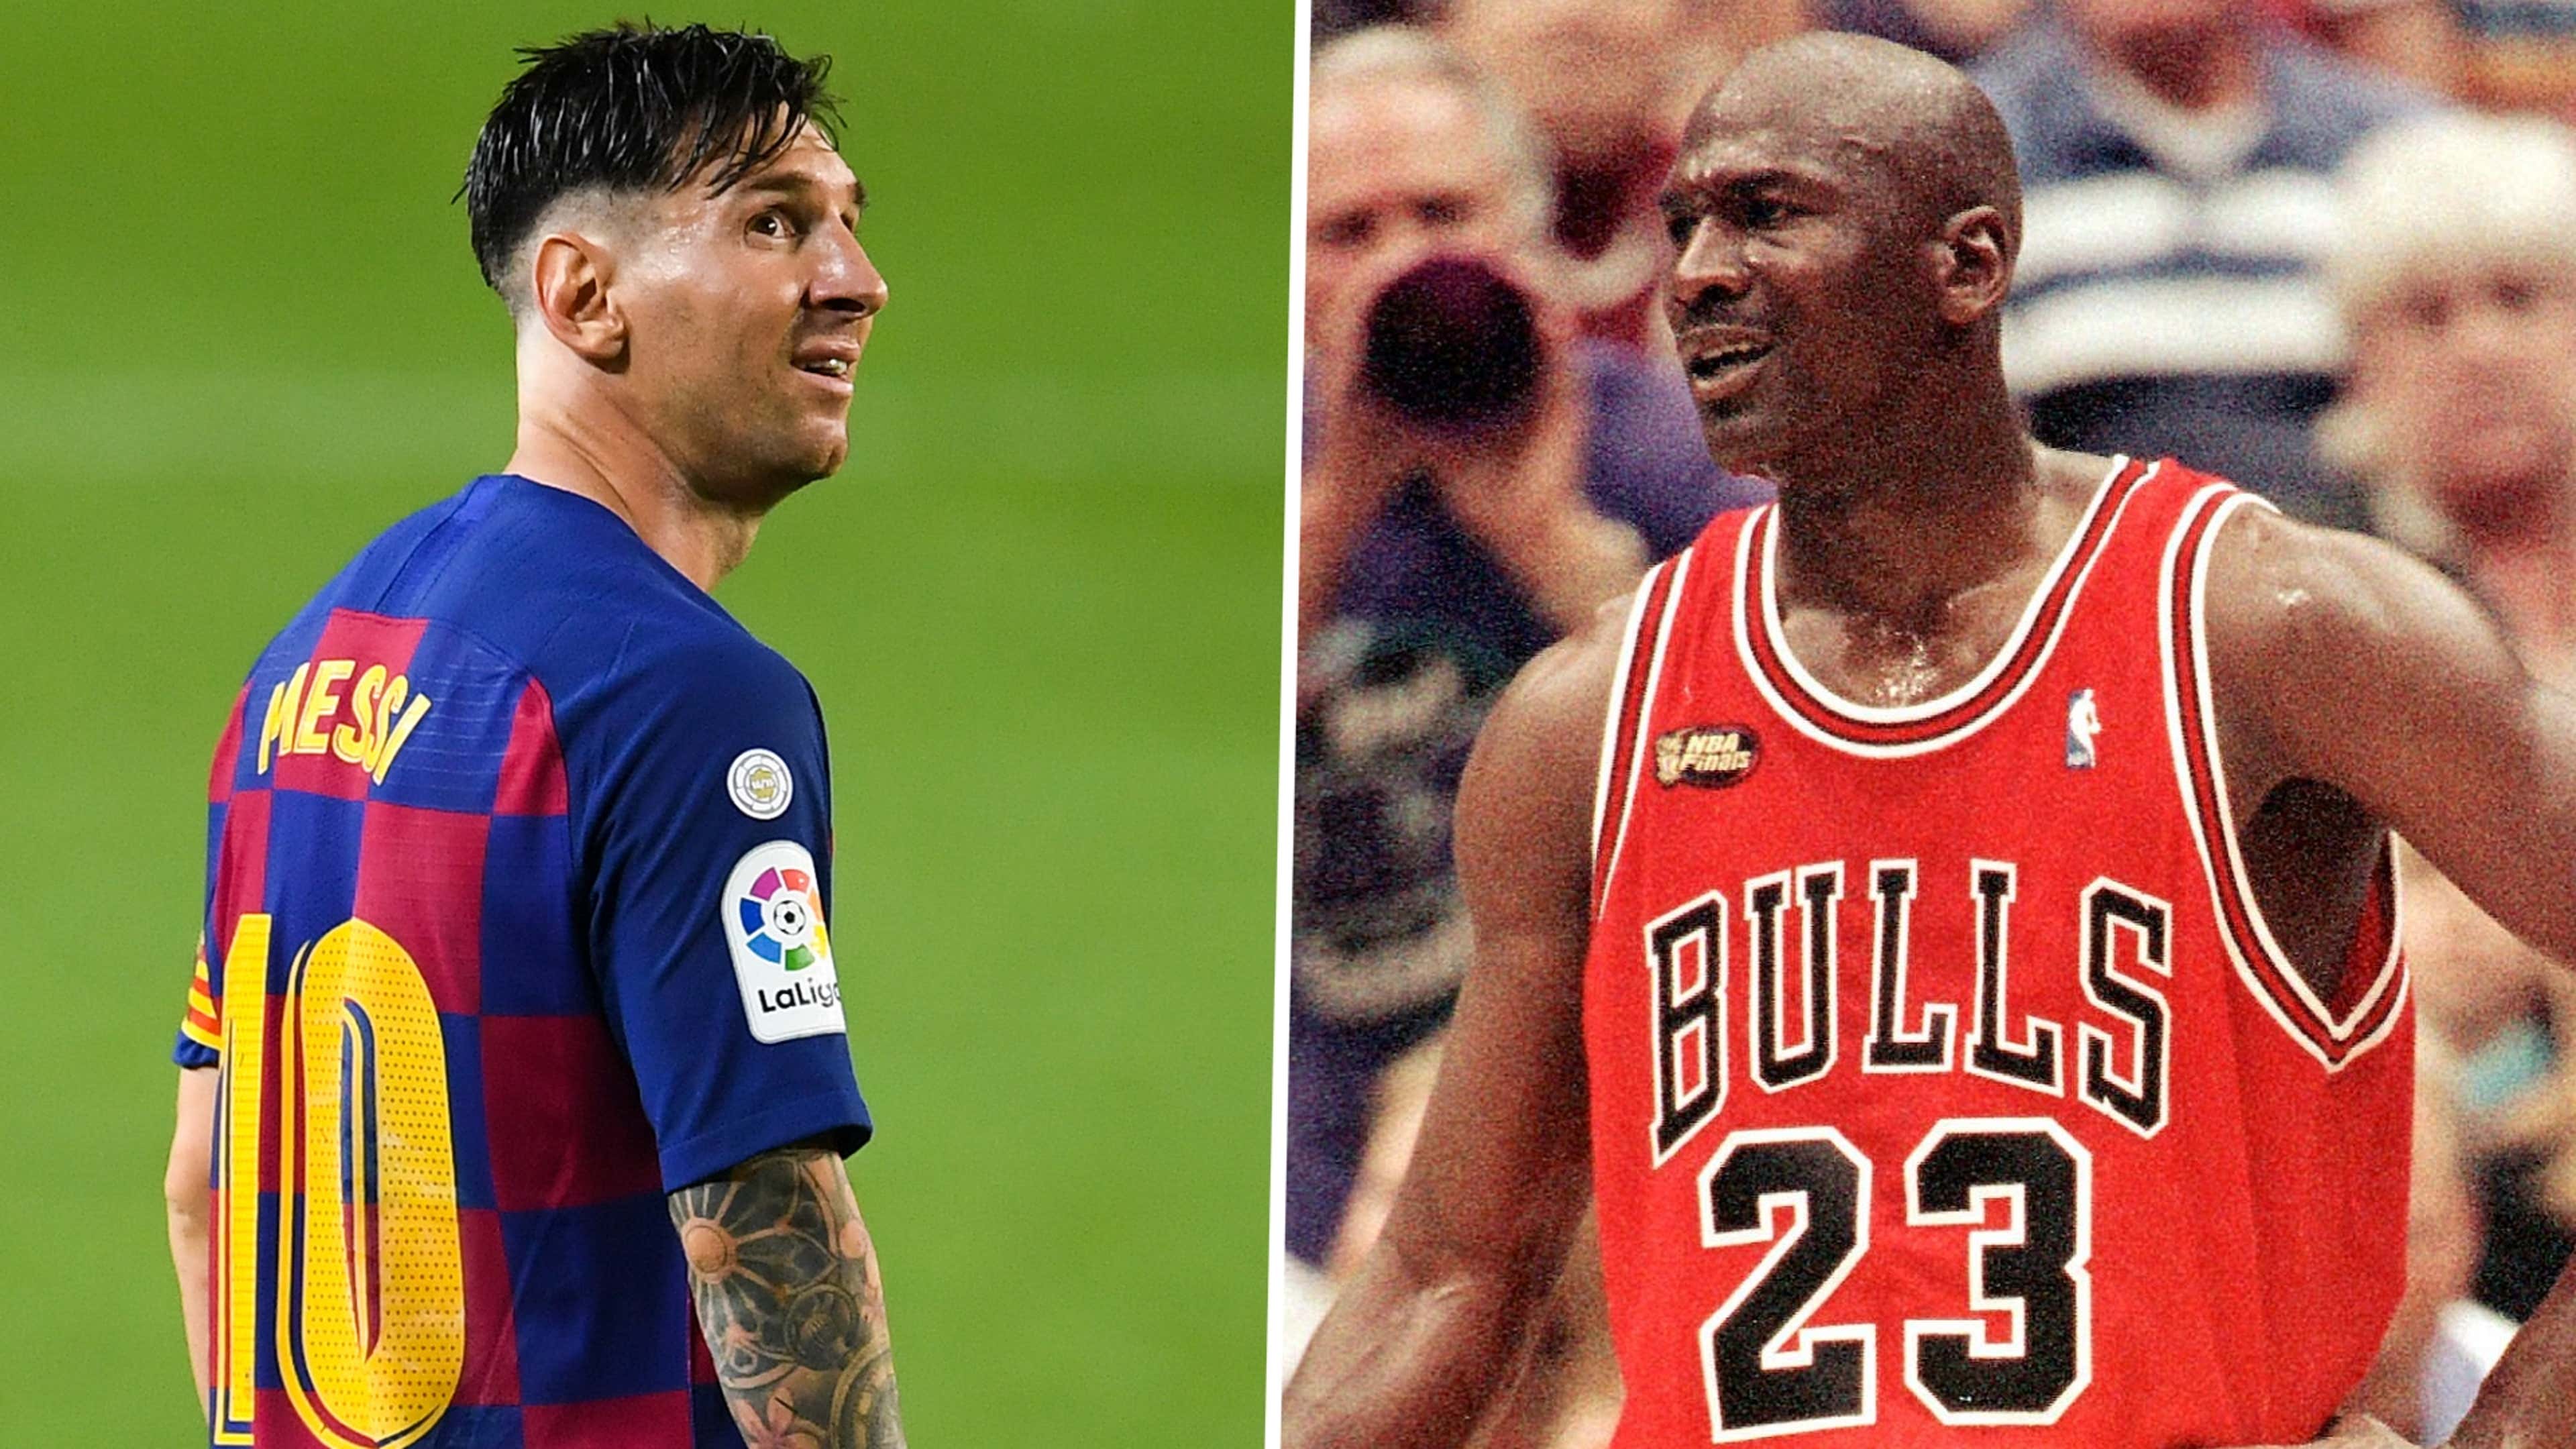 Messi falling into the 'Jordan Rules' trap due to Barcelona's incompetence